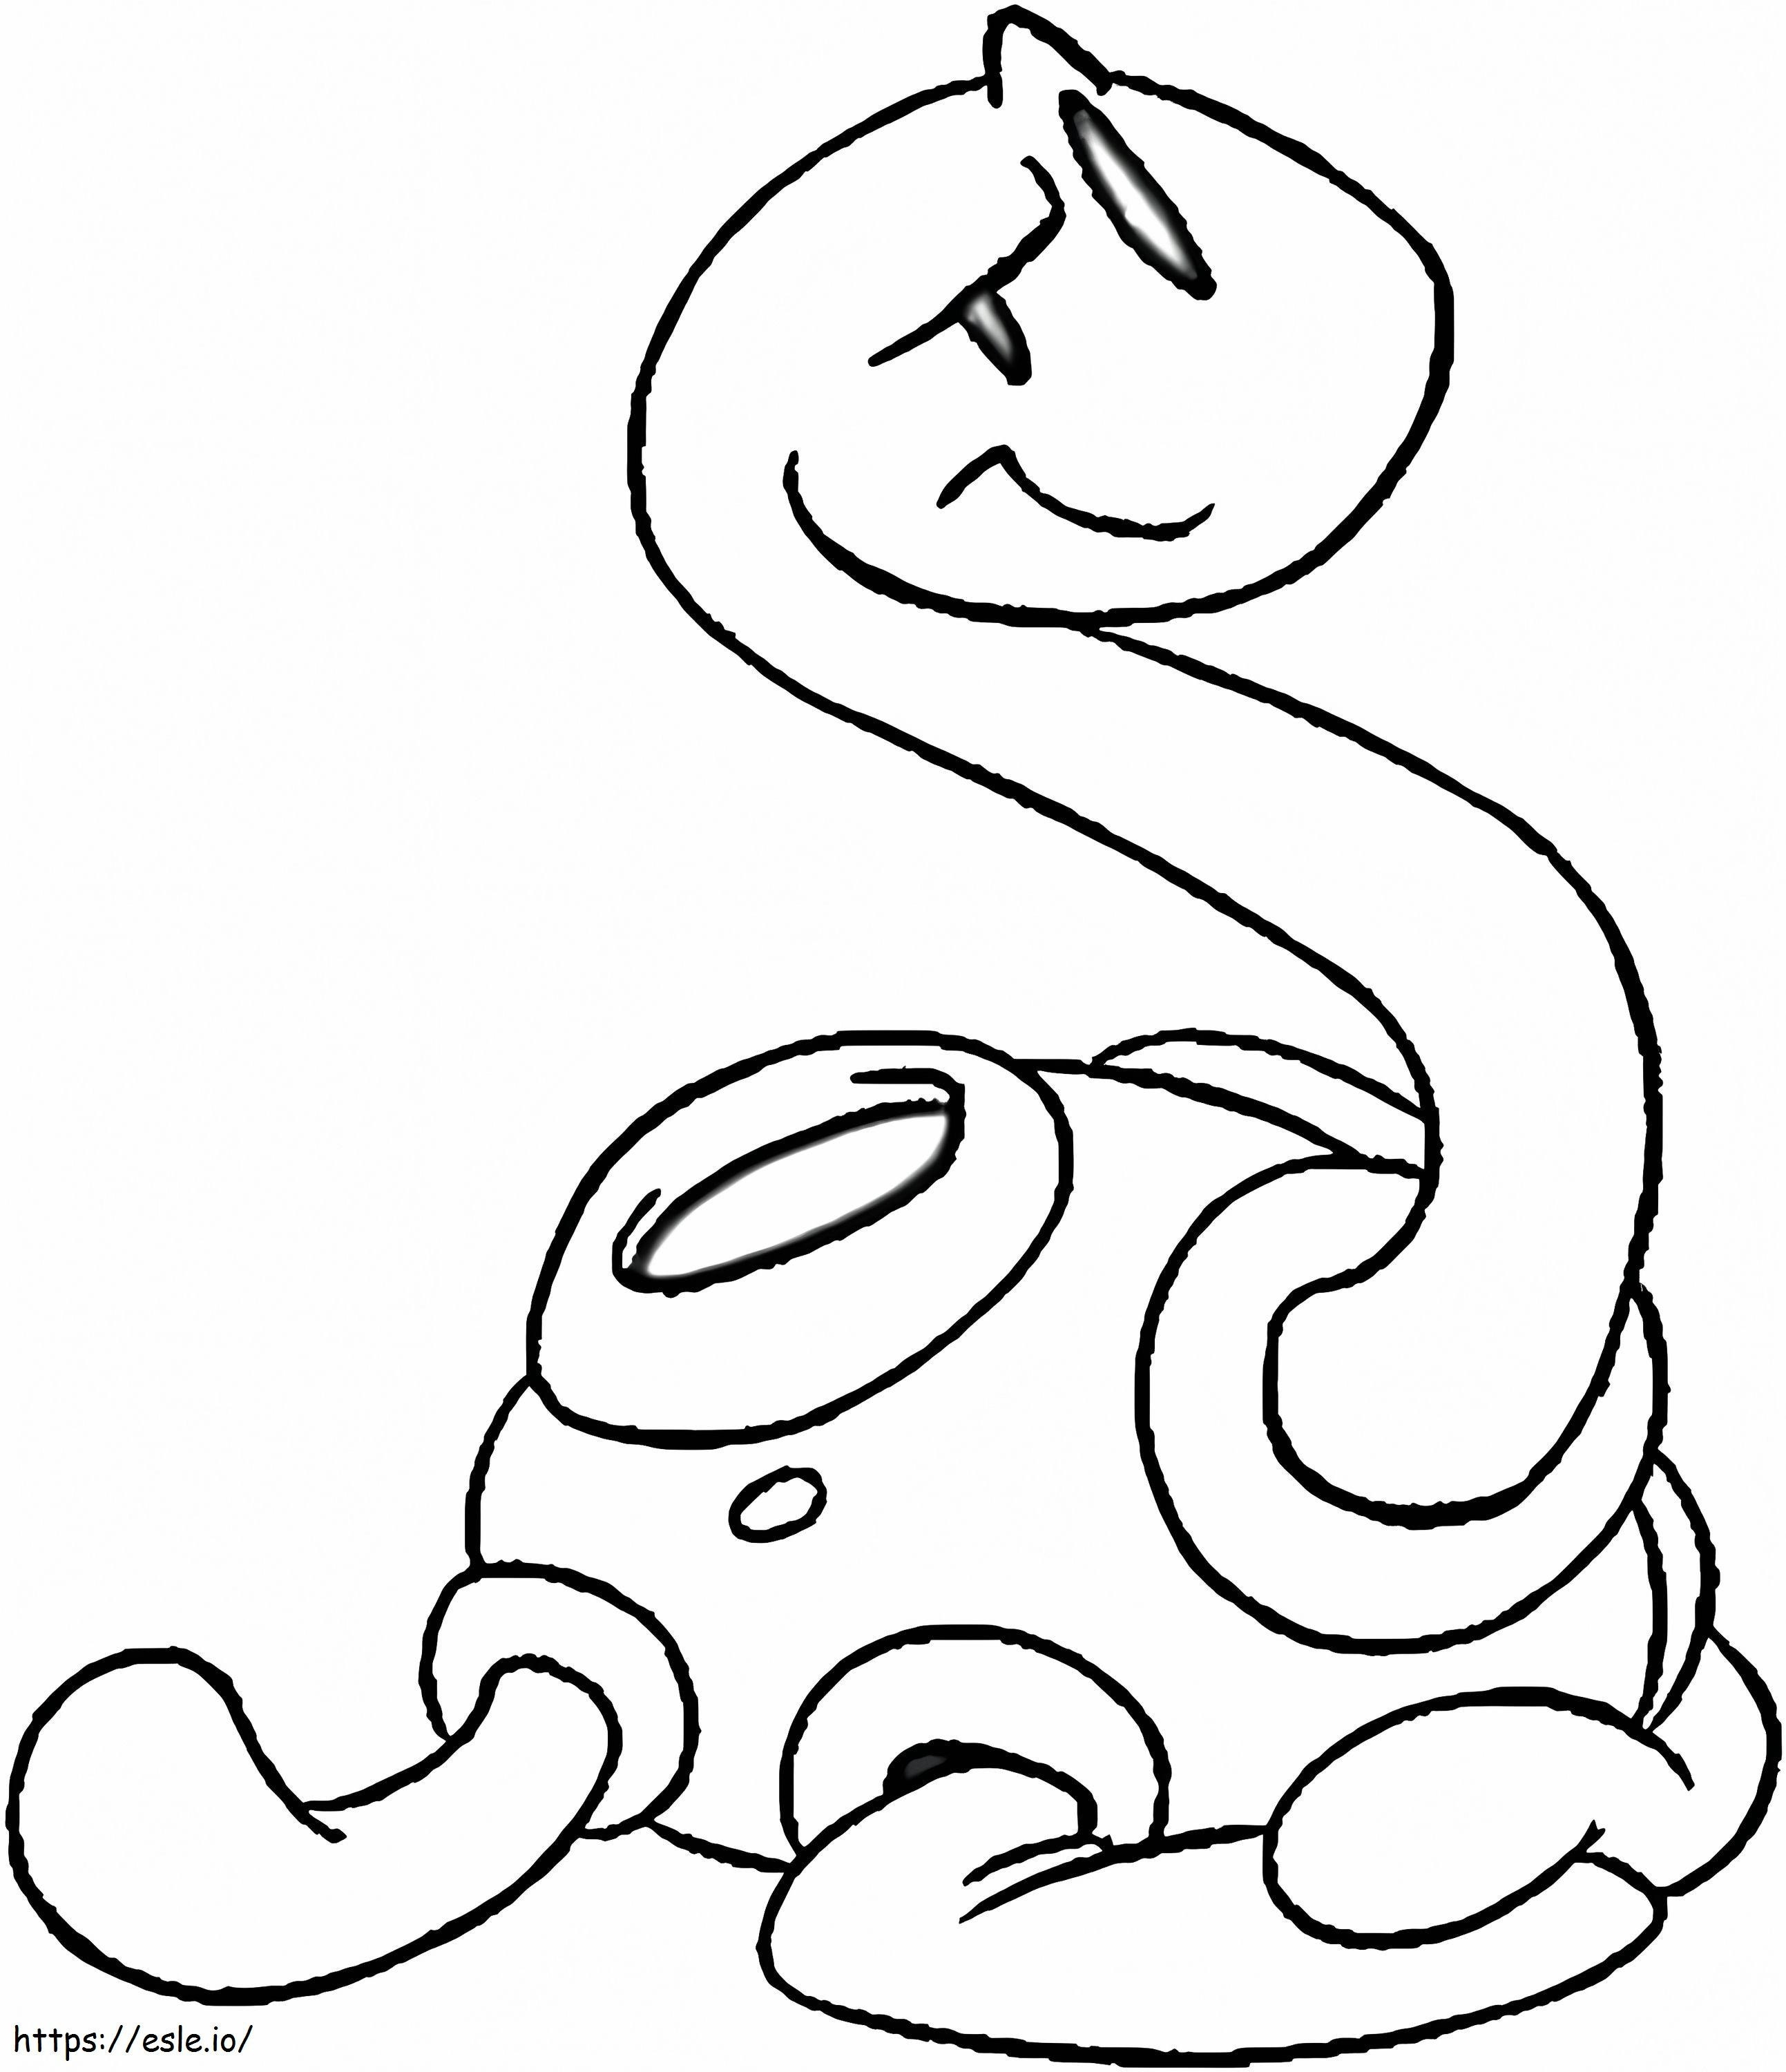 Shuckle Pokemon 3 coloring page